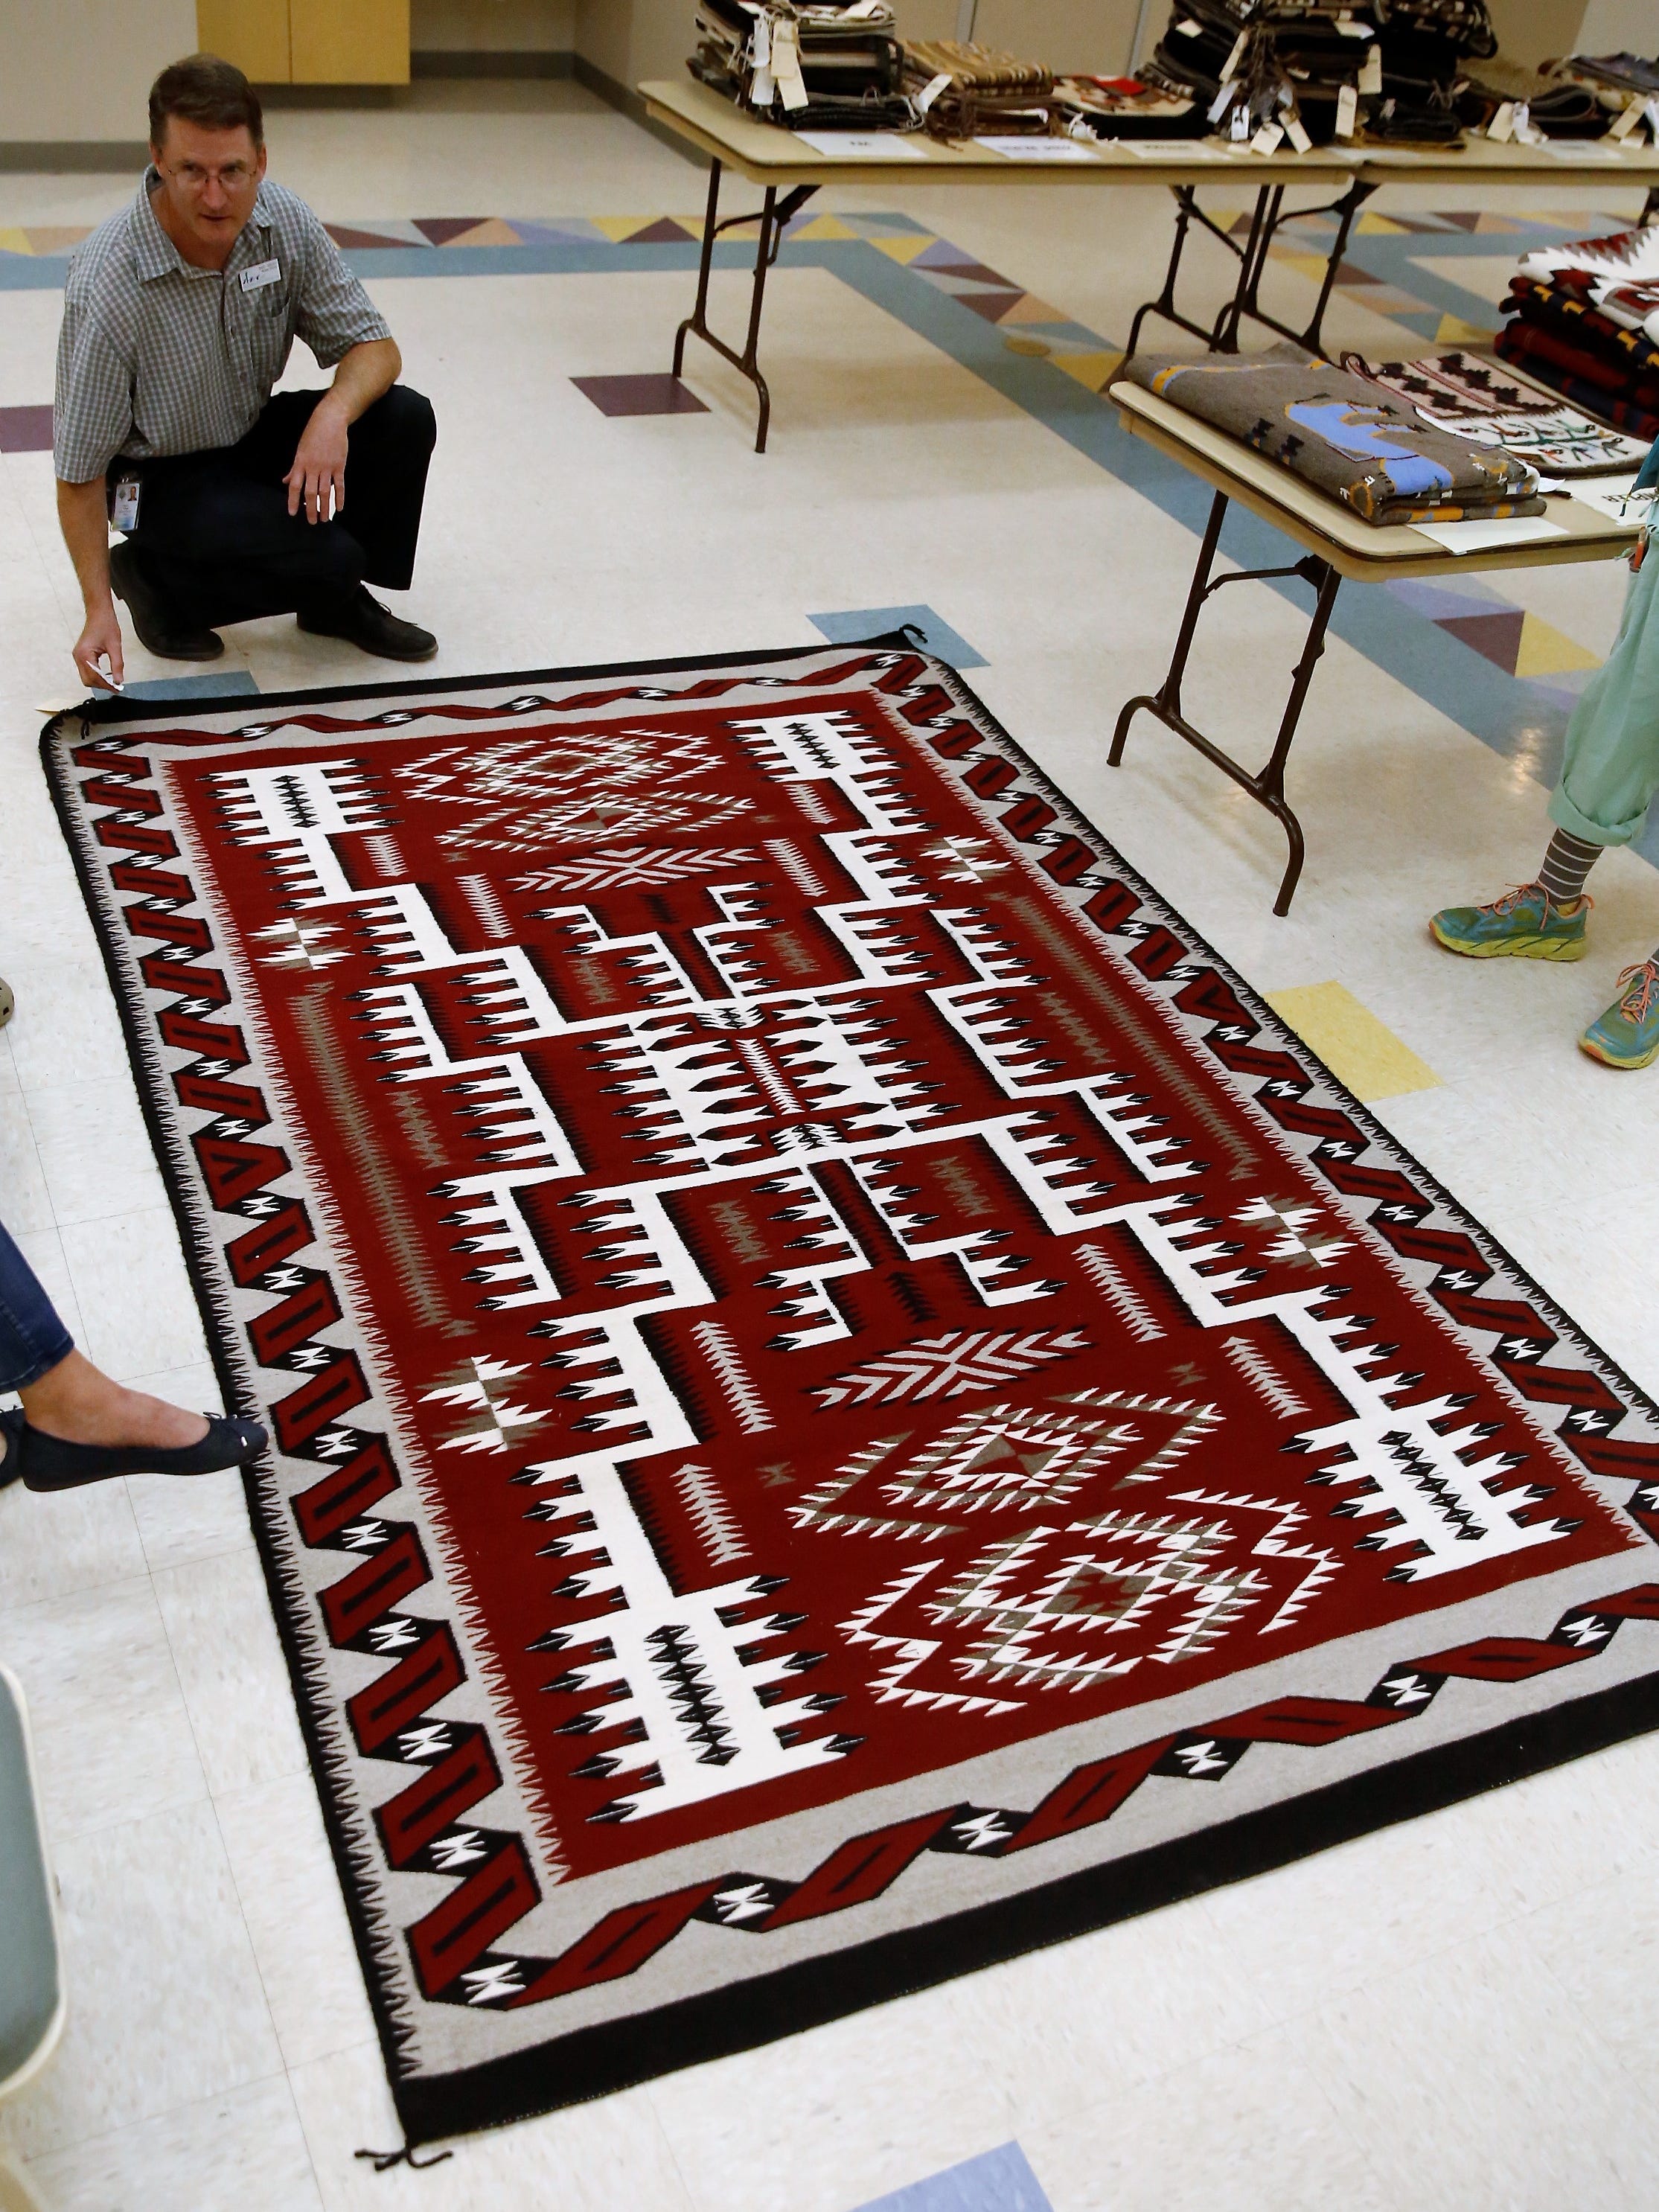 A storm pattern rug by Thelma James from the Shiprock Trading Post is displayed by Farmington Museum director Bart Wilsey Friday.